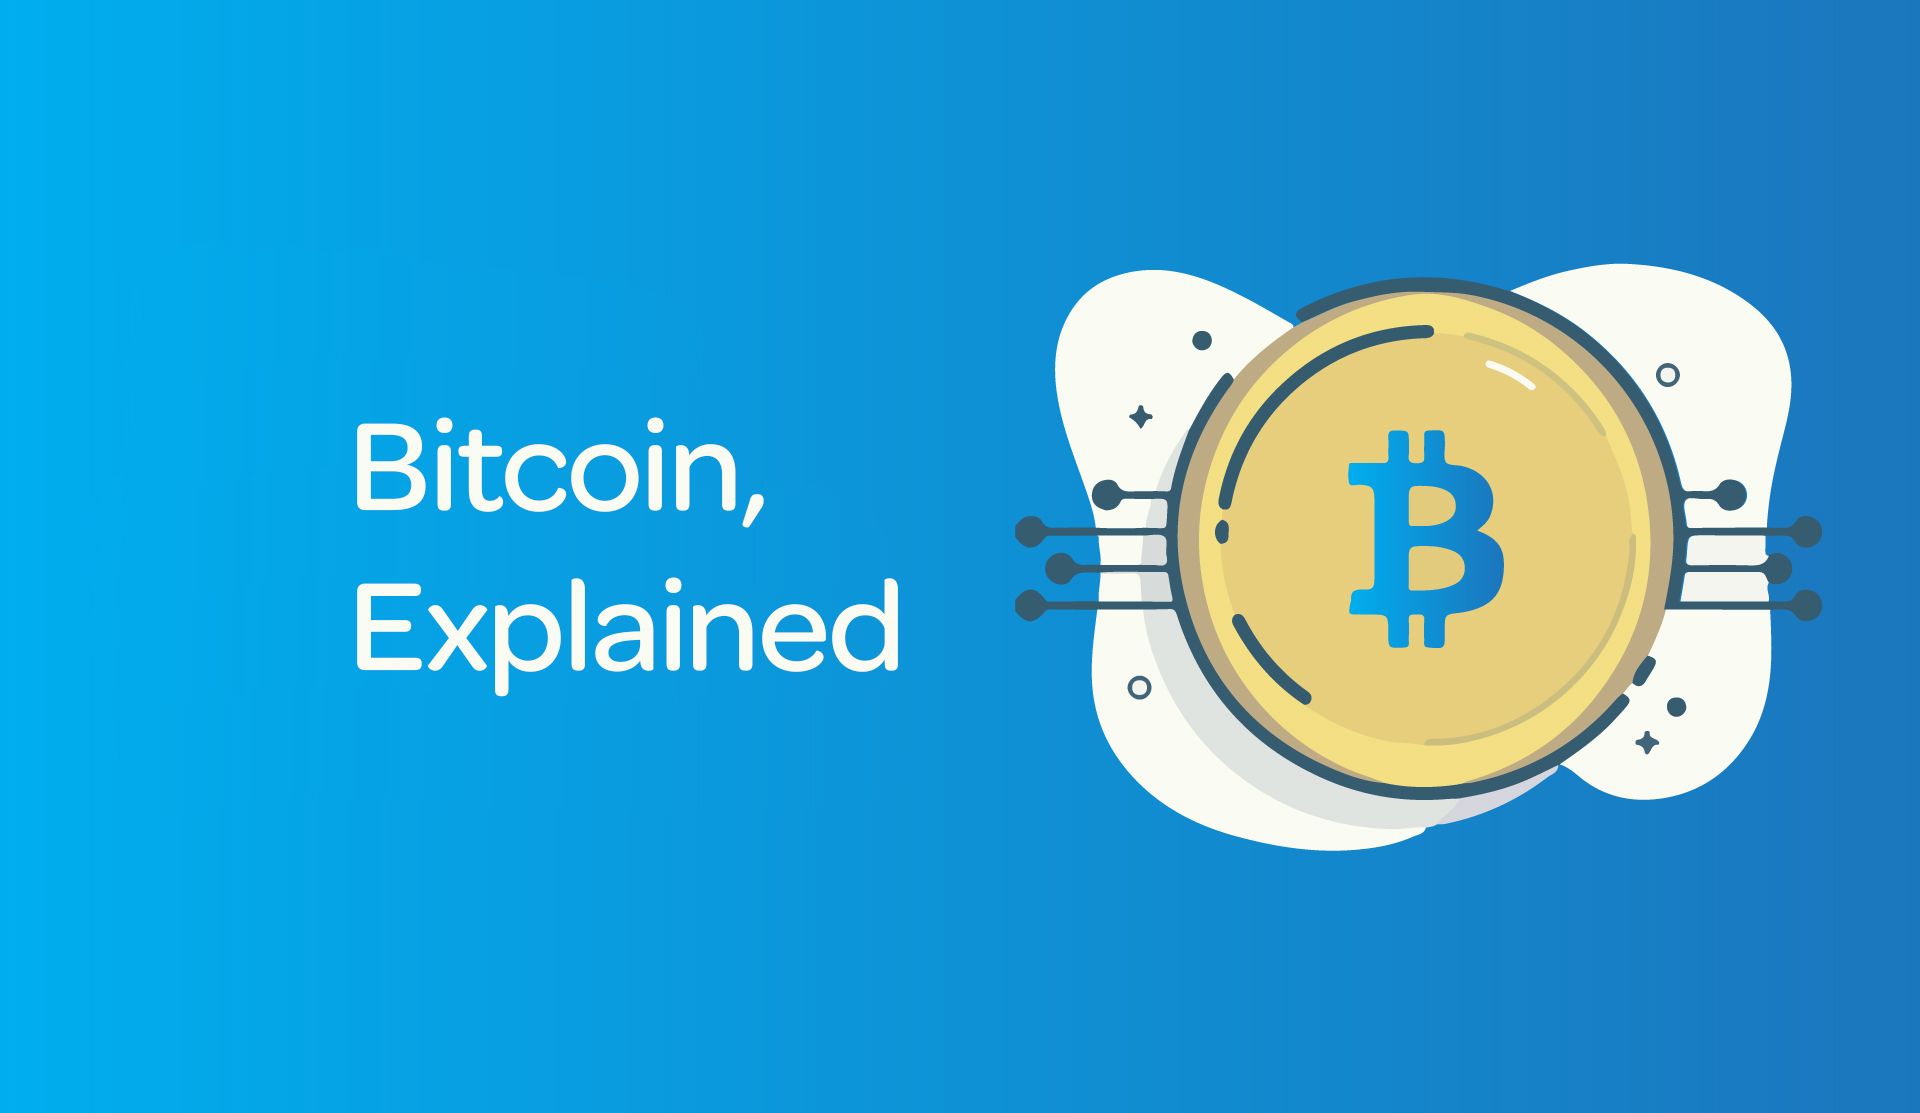 Explain about bitcoin ethereal summmit auction